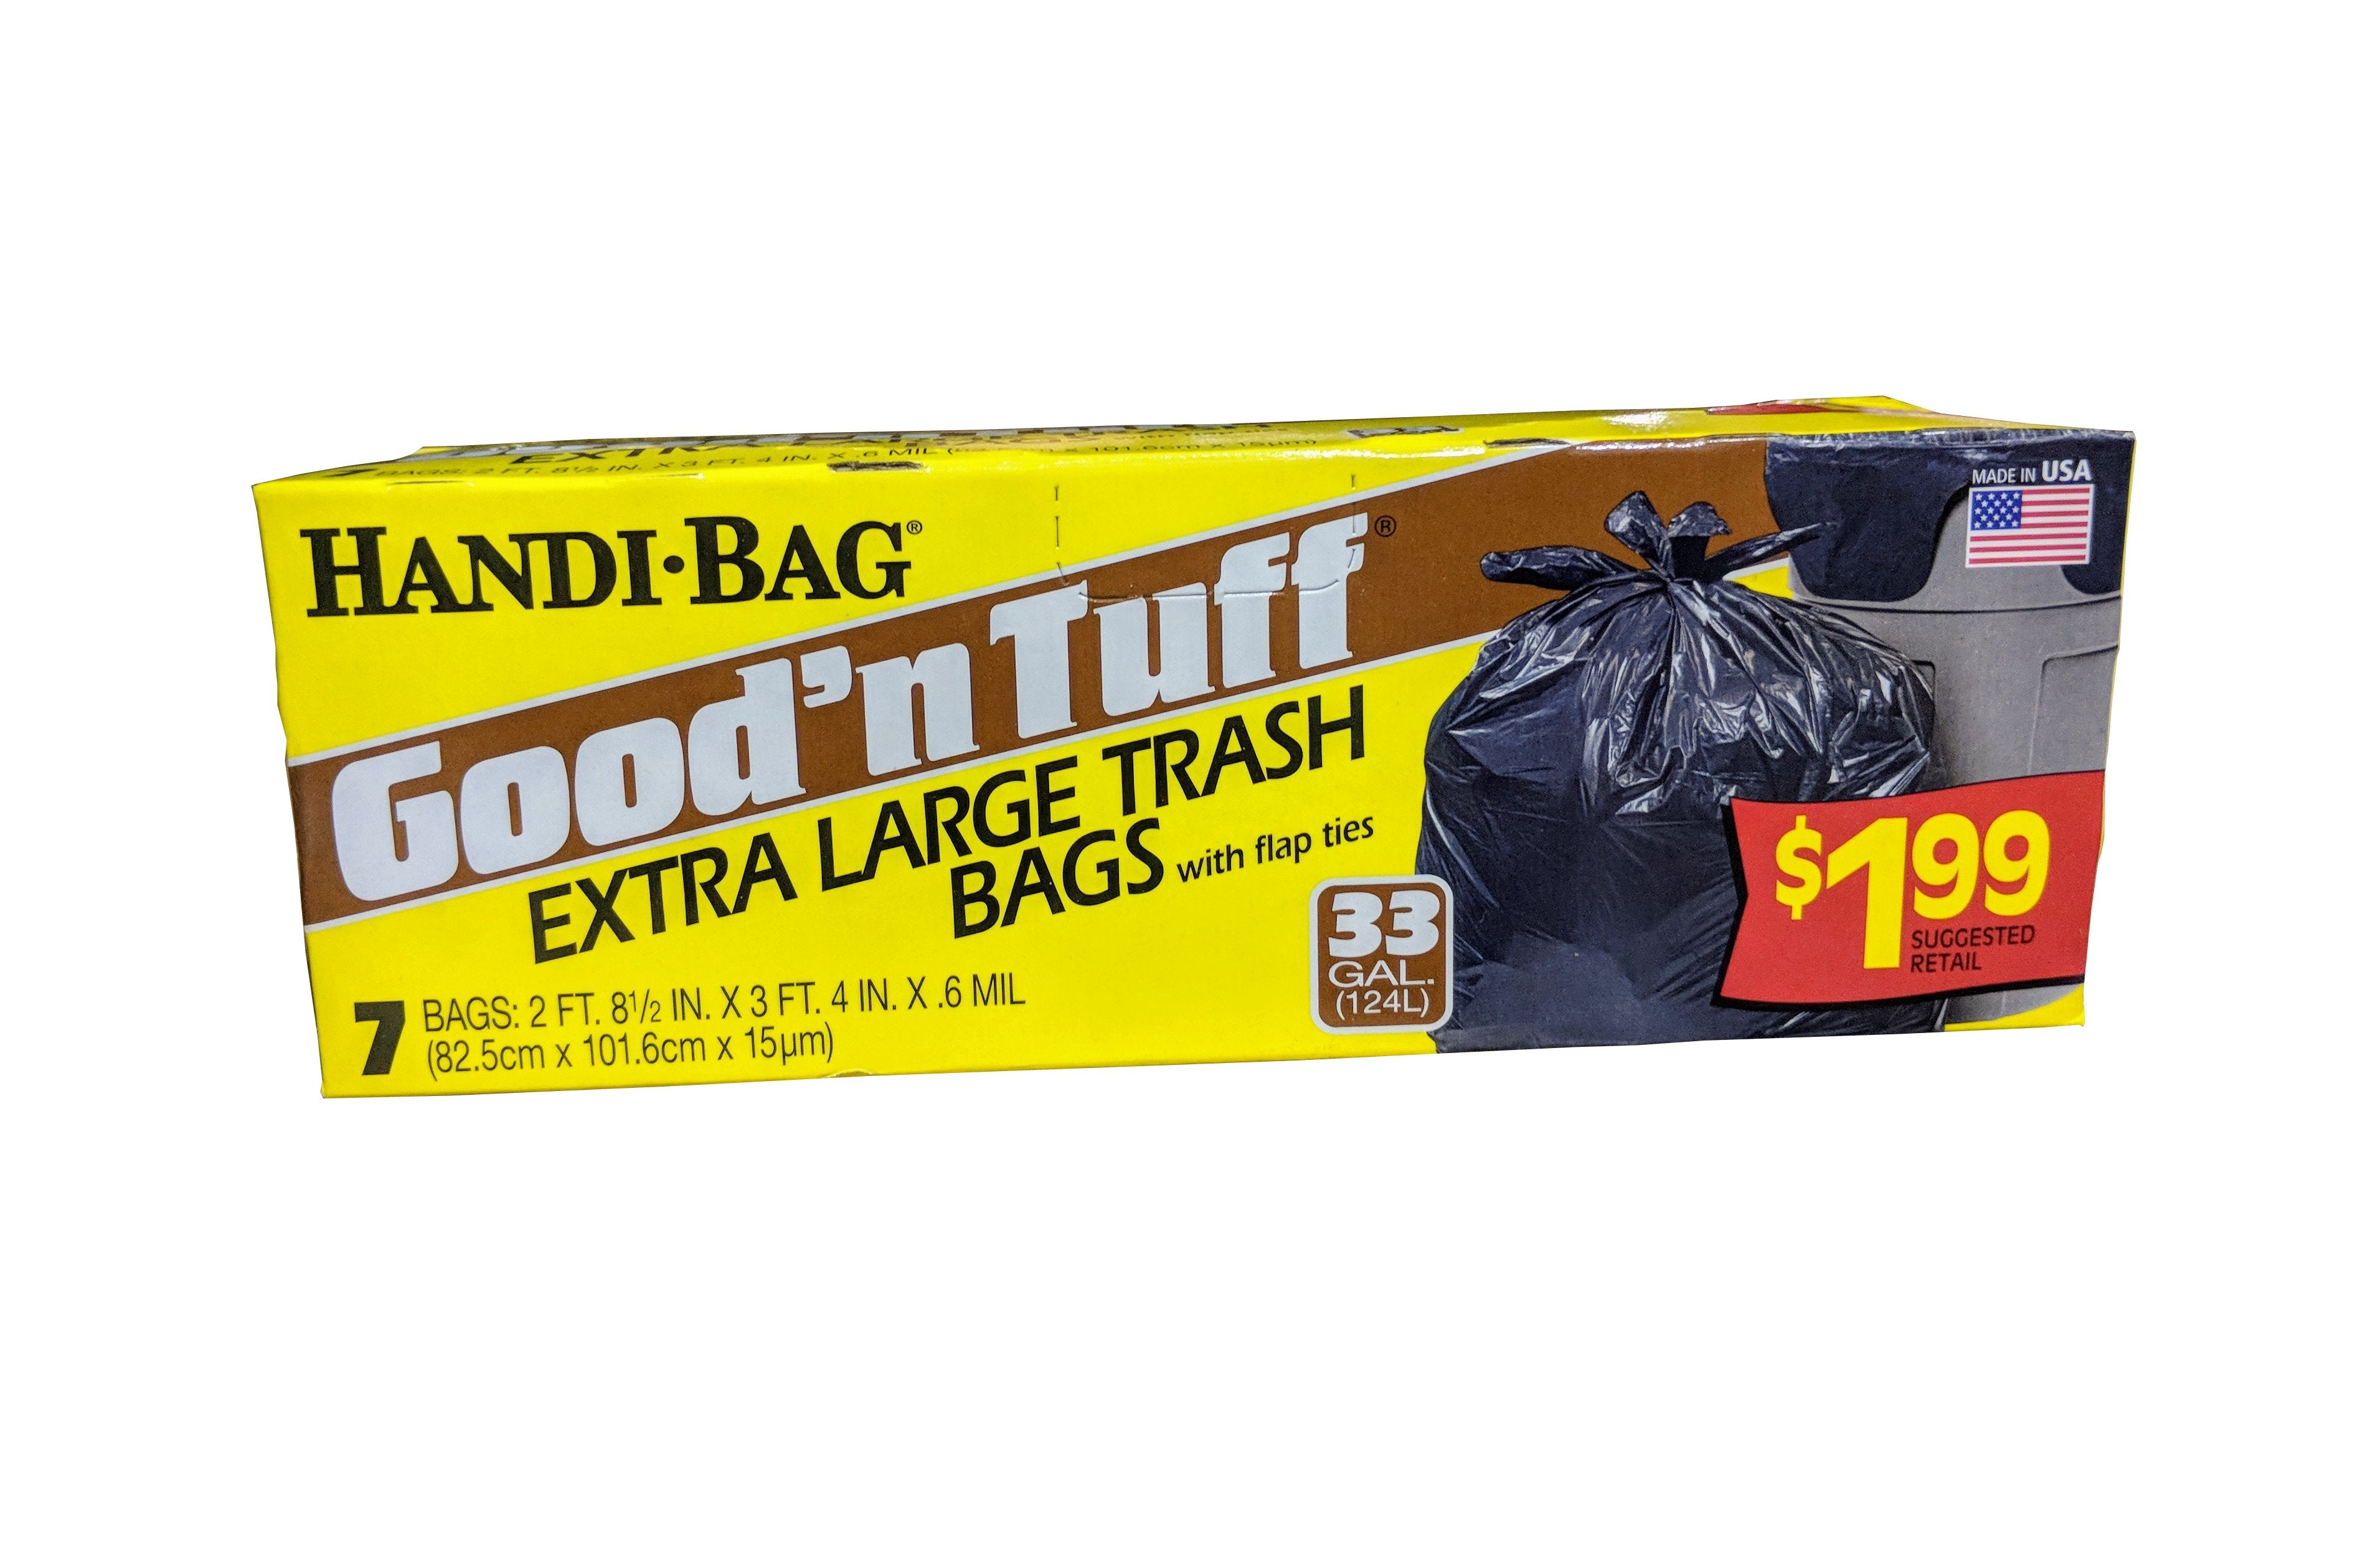 Good'n Tuff - Extra Large Trash Bags, 33 Gallon, Flap-Ties, 7 Pack - Case of 12